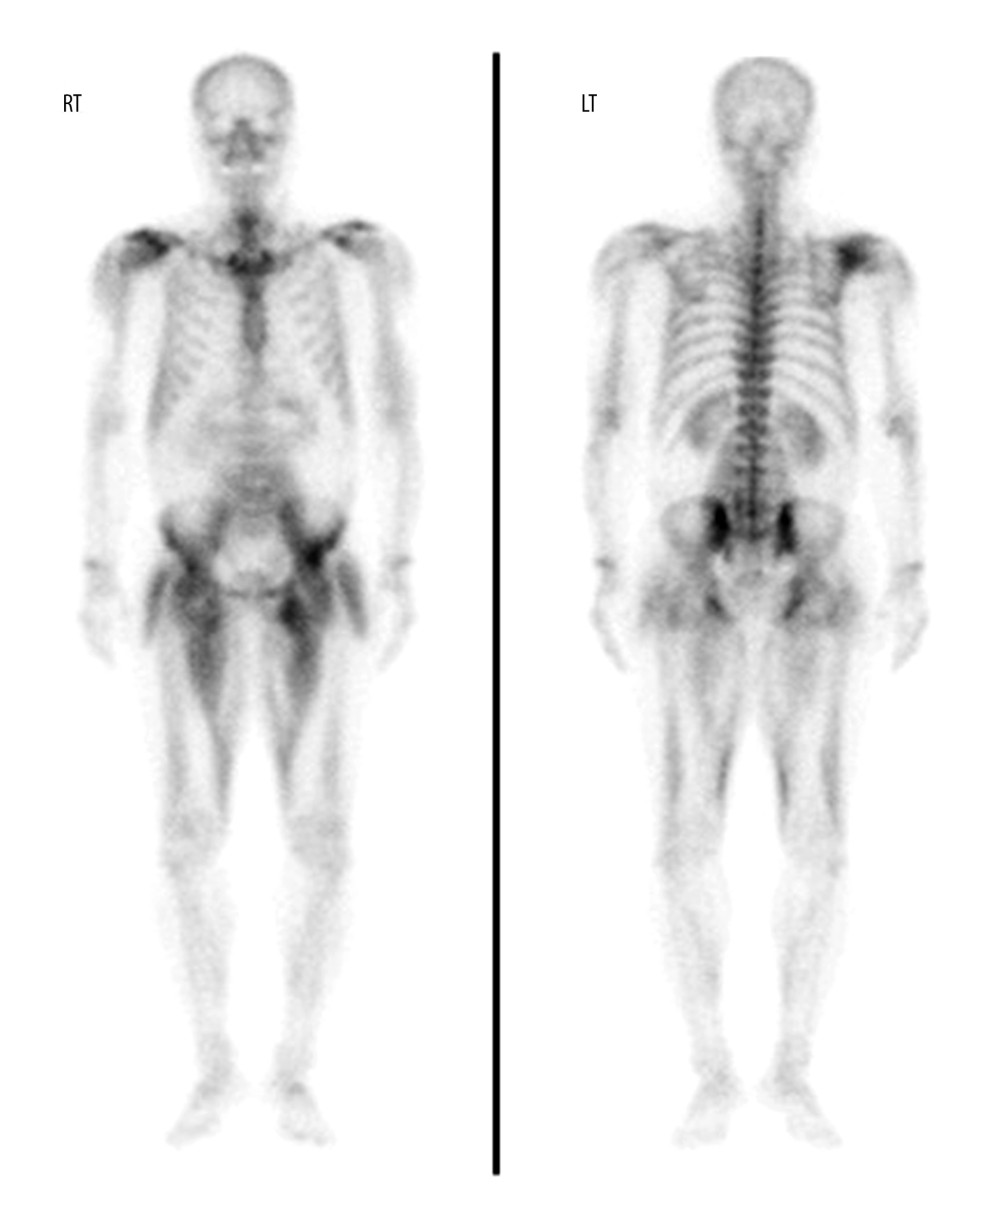 Bone scintigraphy with 99mTc-HDP on hospitalization day 7 showed increased isotope uptake in the both arms and legs. RT – right; LT – left.